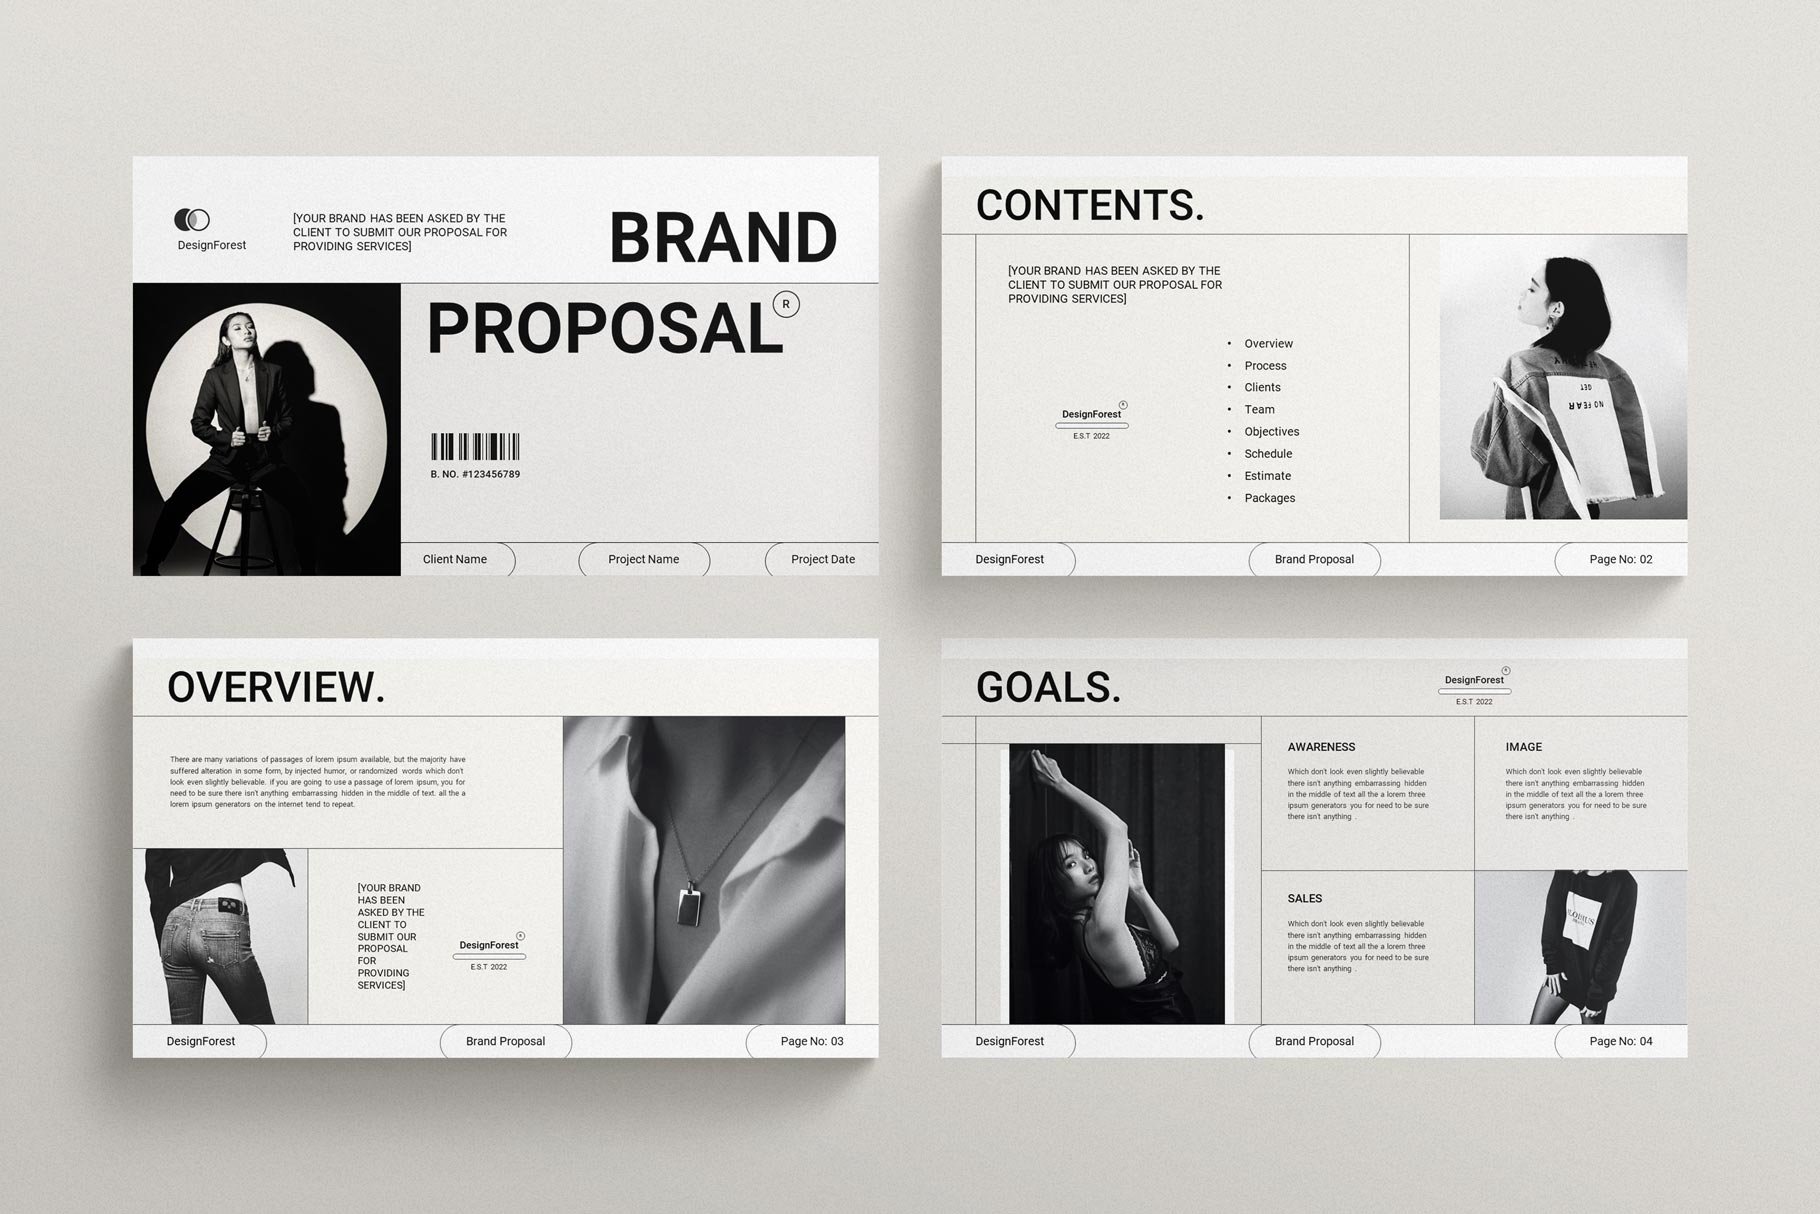 Brand Proposal Presentation Template preview image.